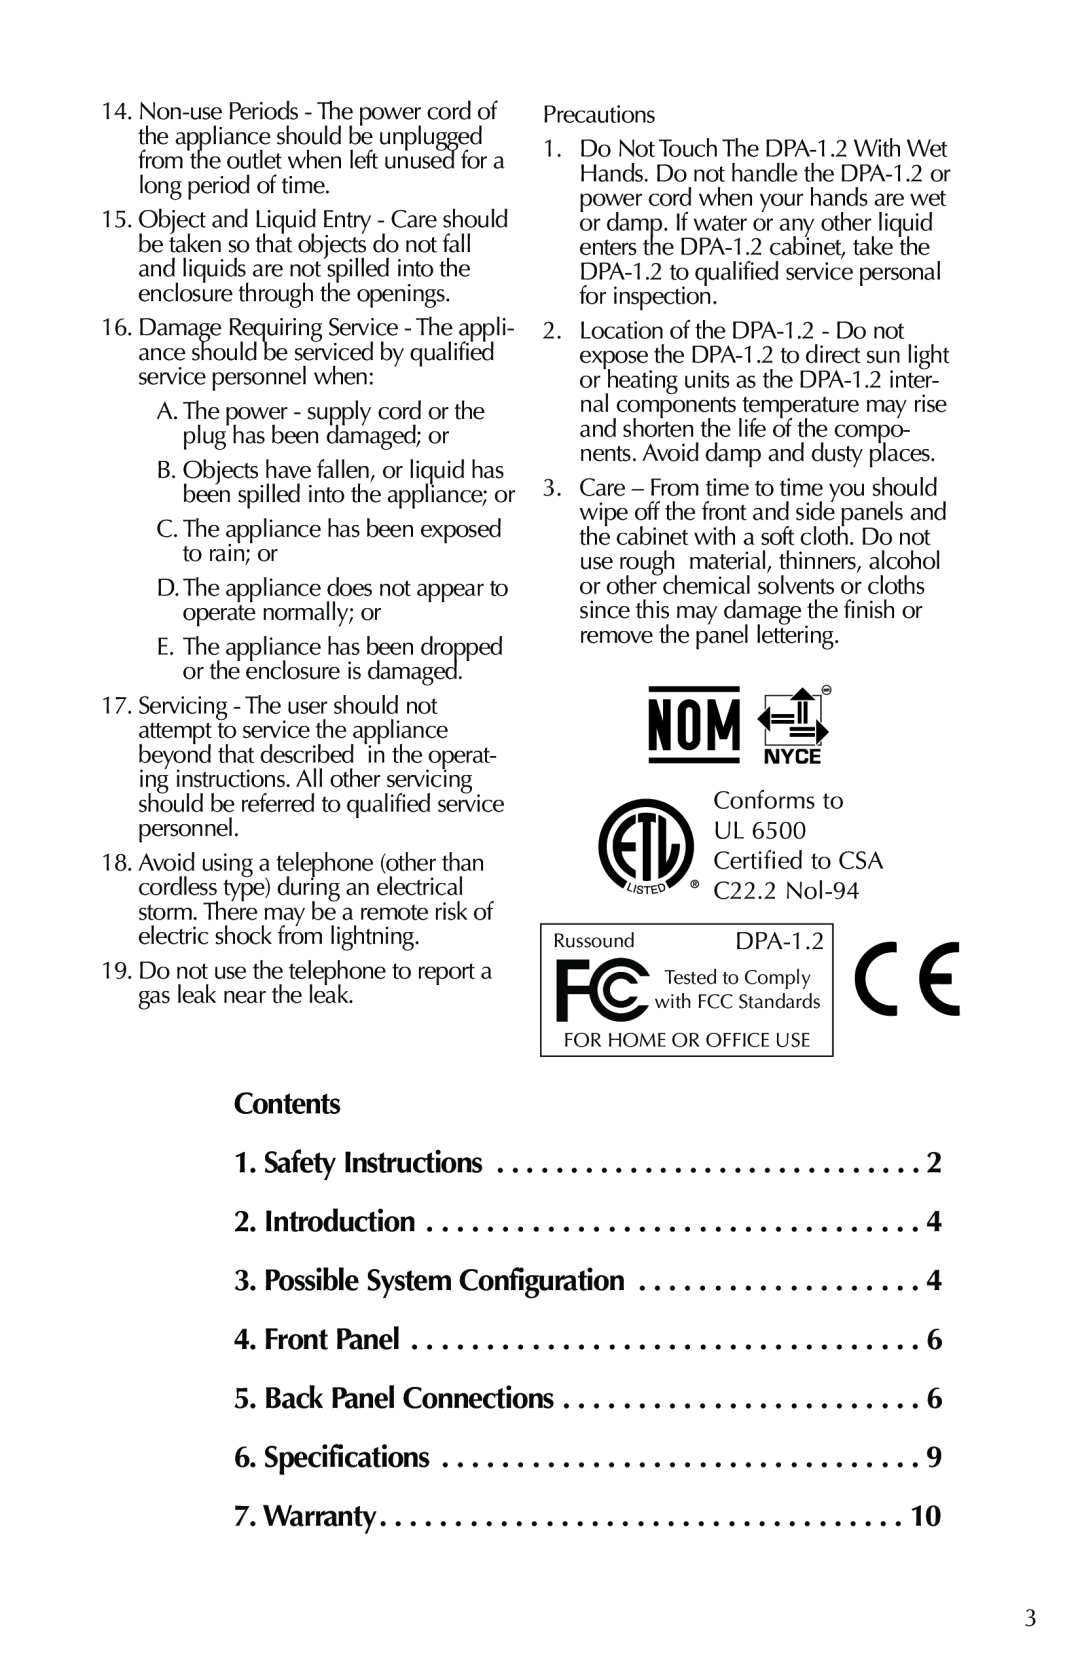 Russound DPA-1.2 instruction manual Contents 